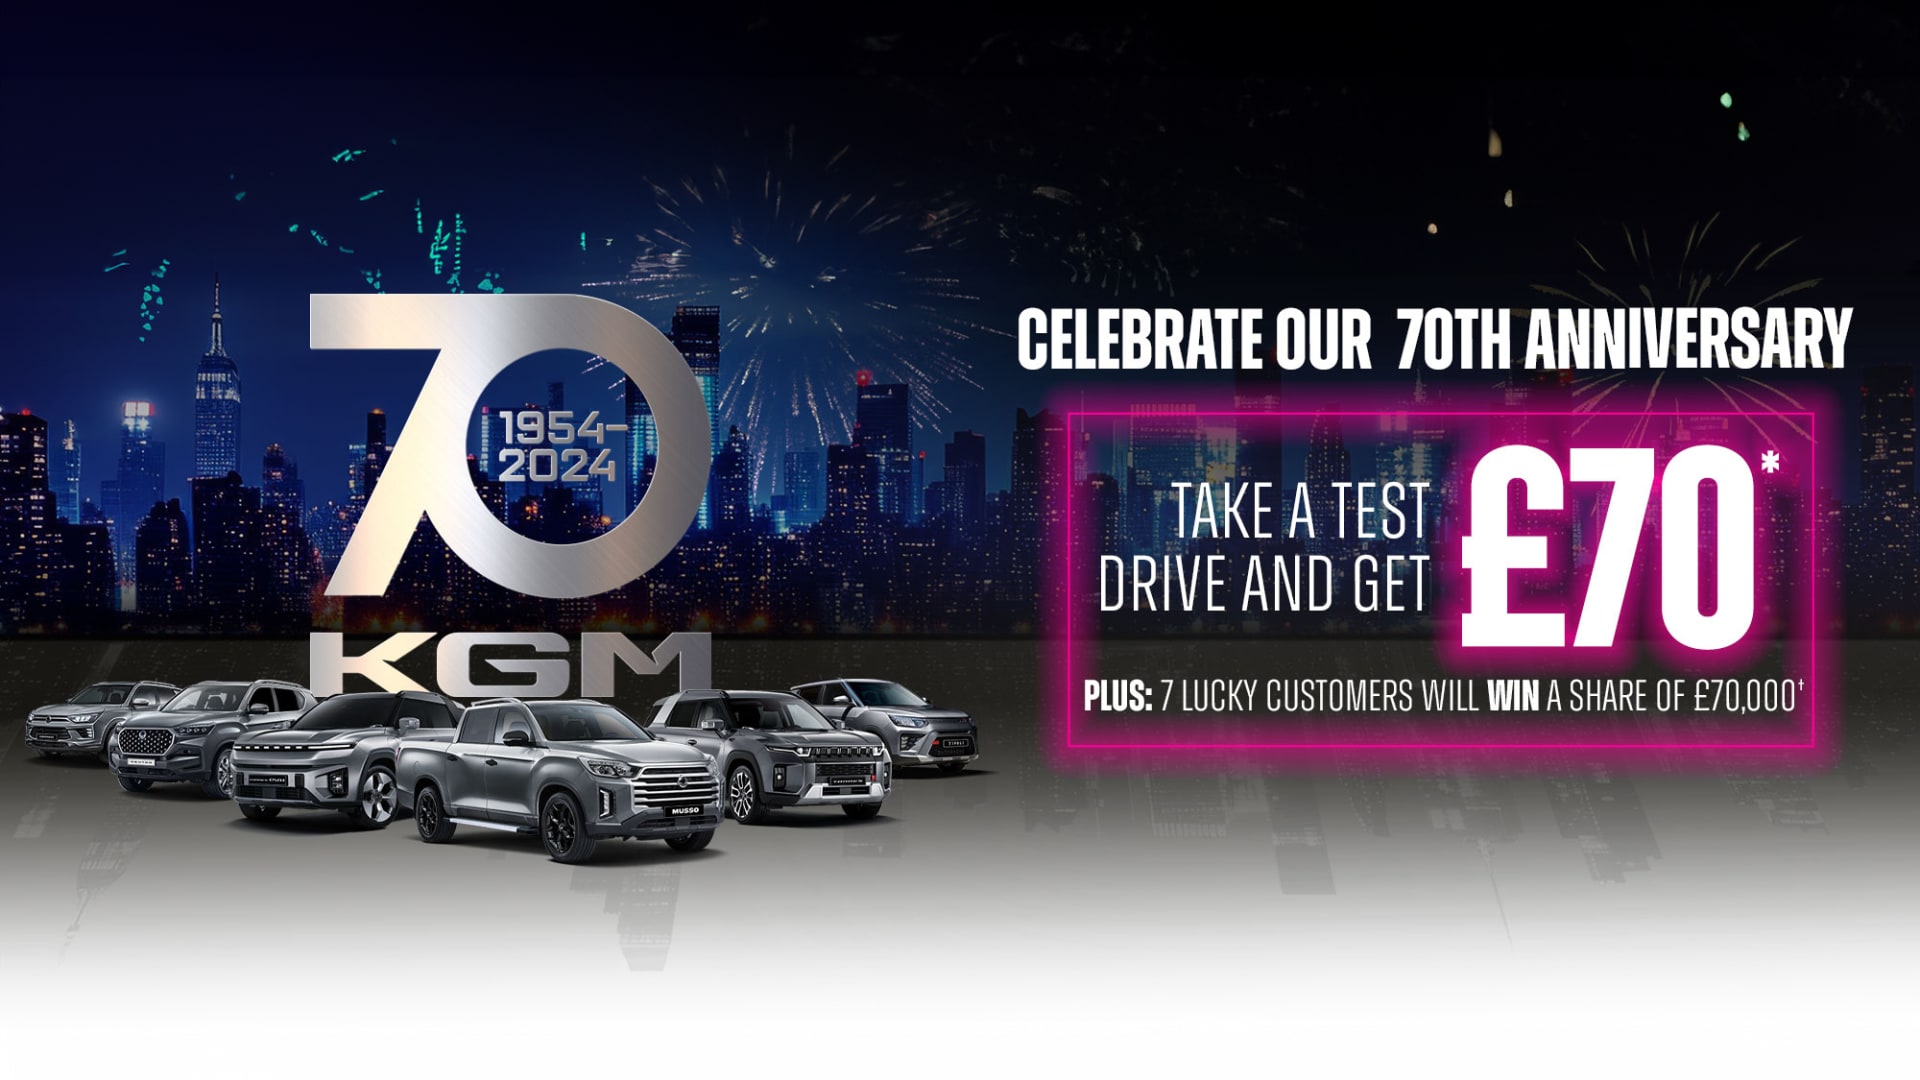 TAKE A TEST DRIVE AND GET £70*